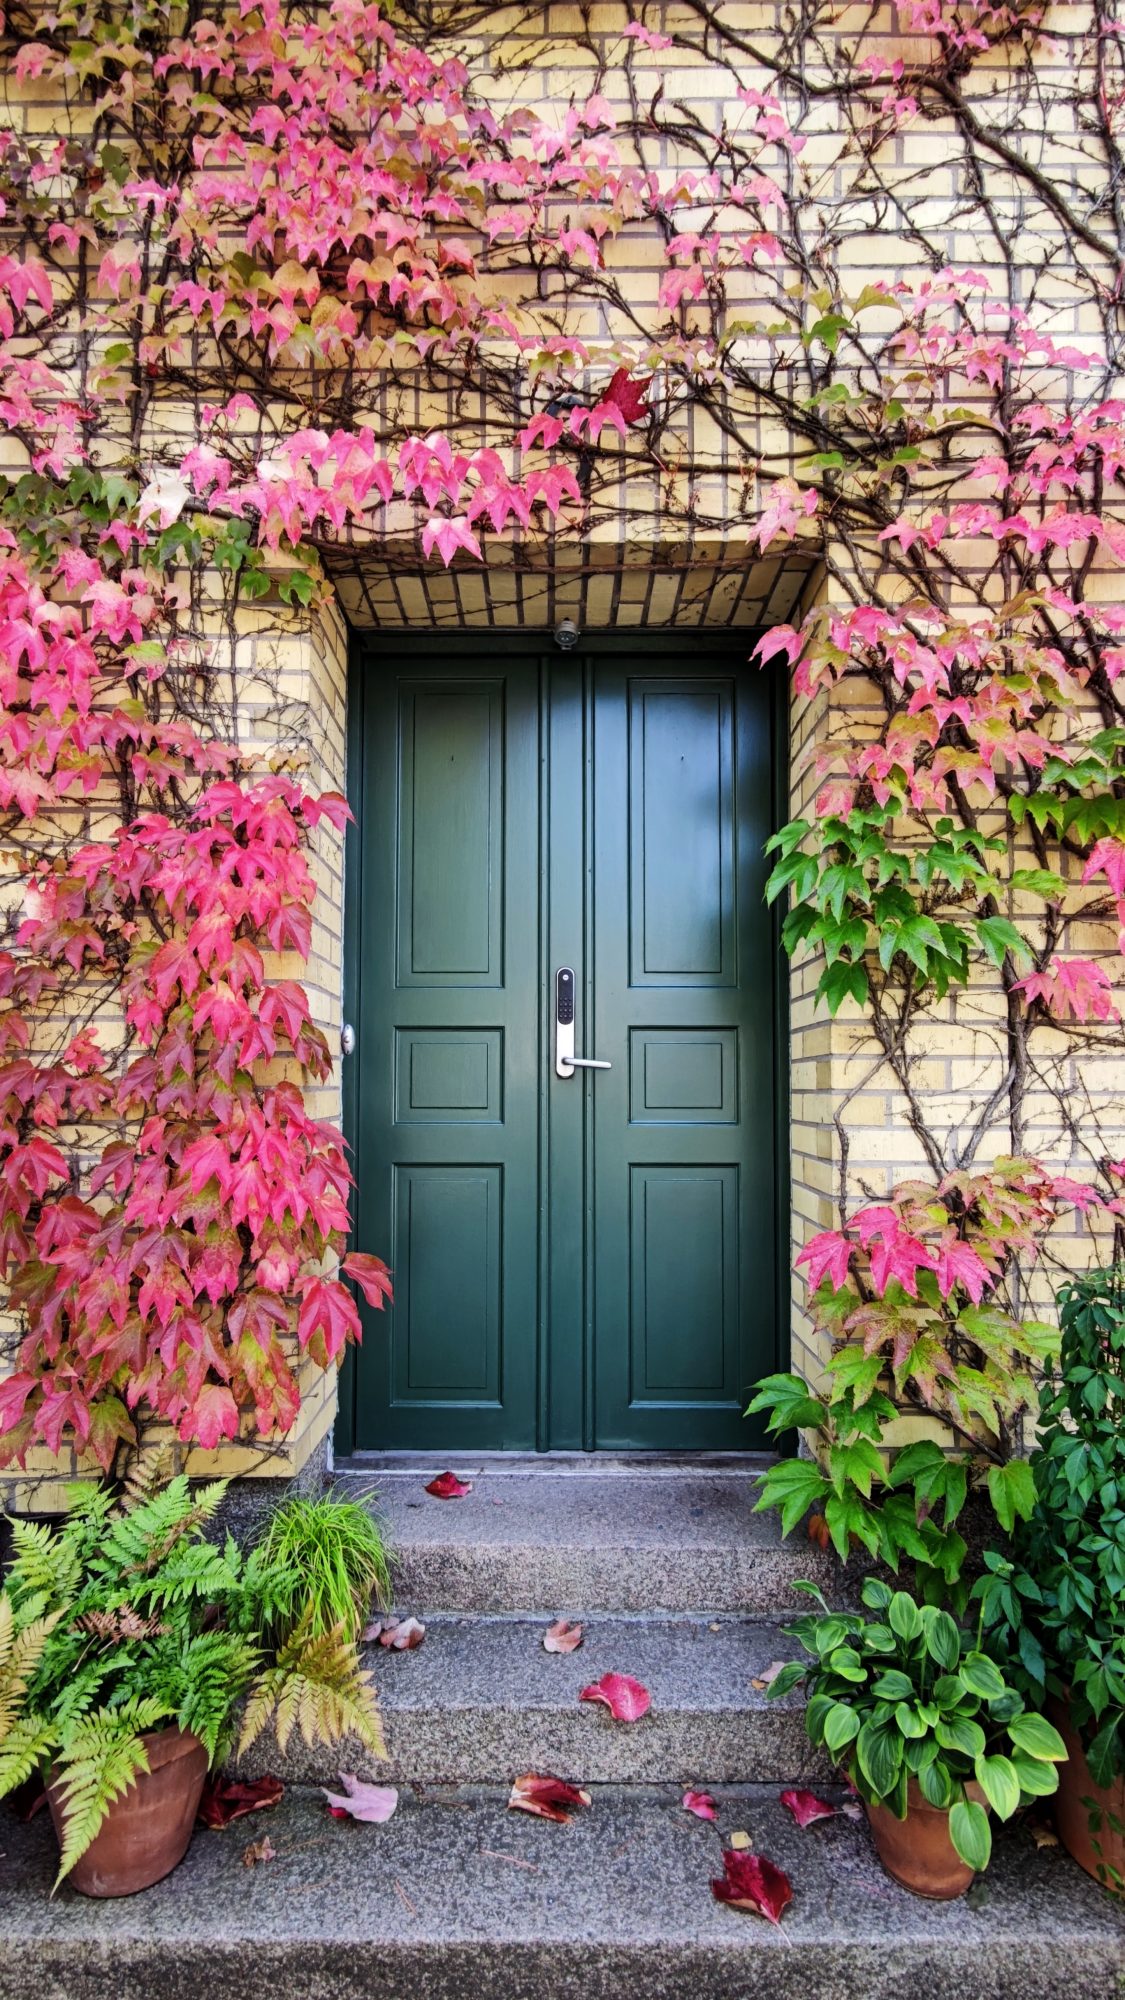 5 Ways To Amp Up Your Home's Curb Appeal Through Front Door Design